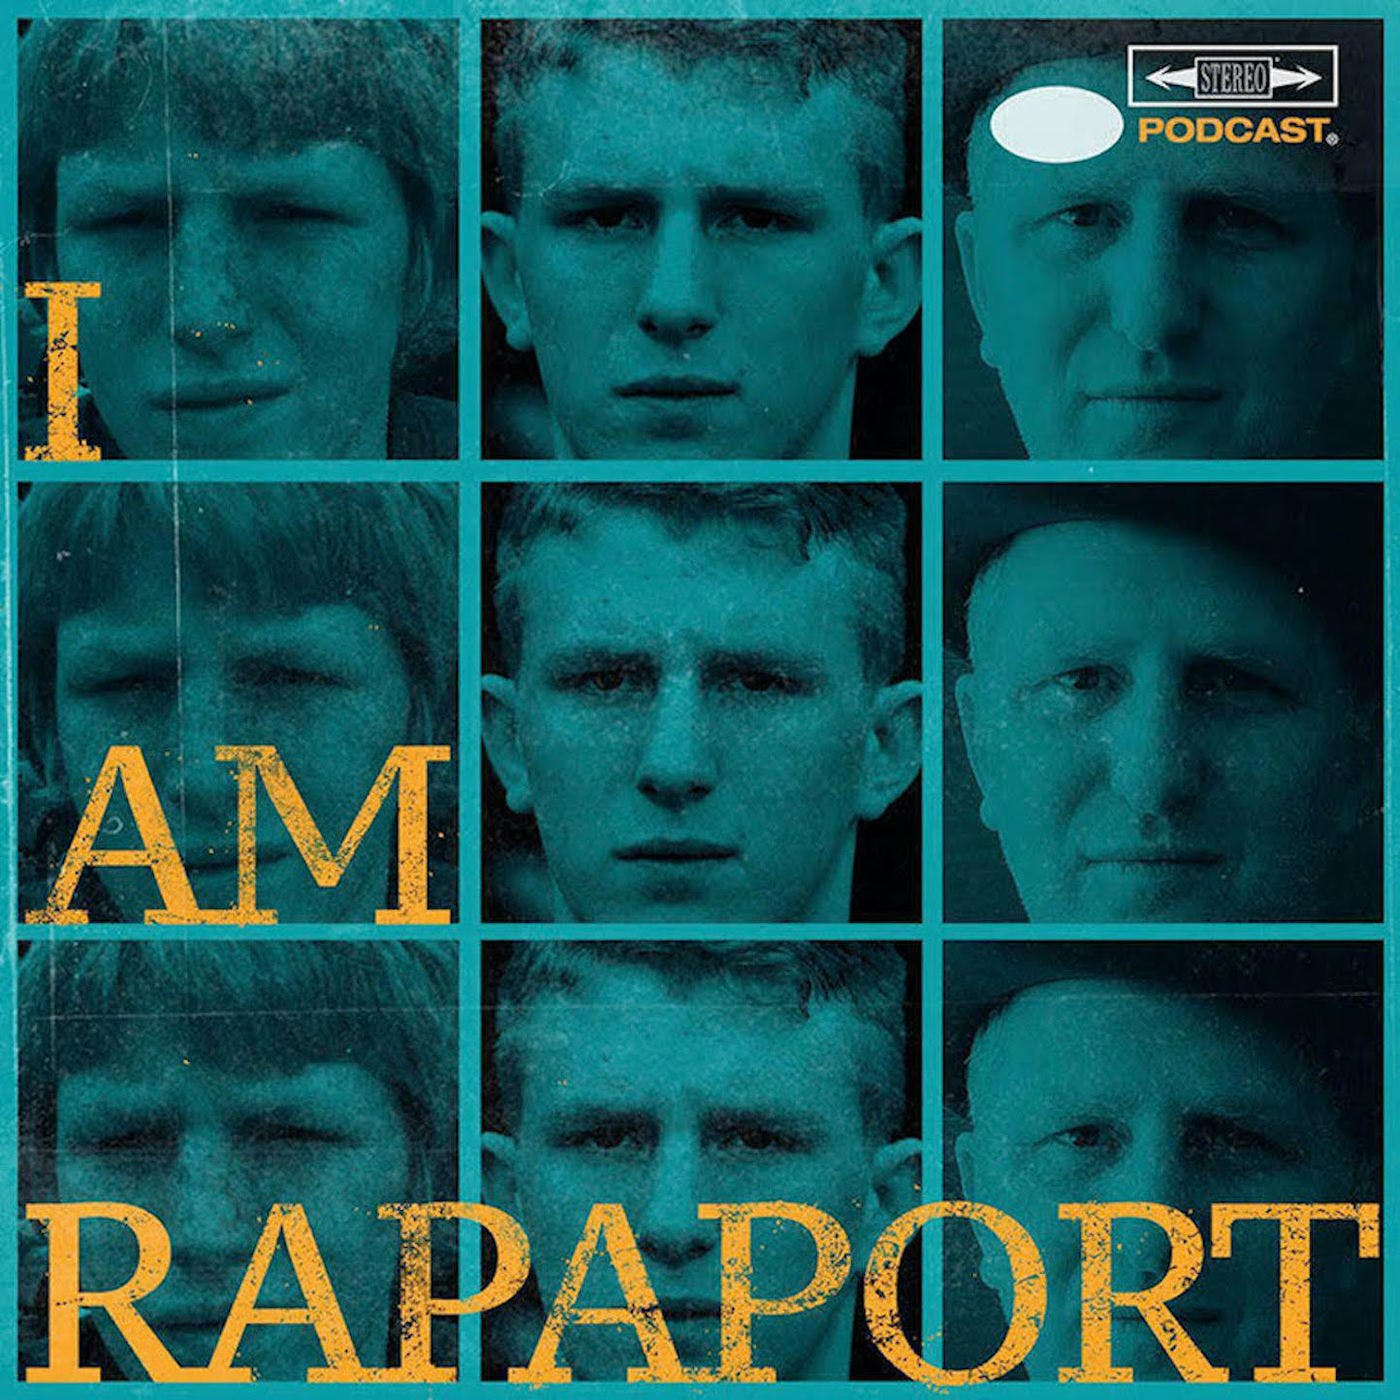 EP 254 - MICHAEL F*CKING RAPAPORT/SICK F*CKS OTW/ALL LOAFS MATTER/NEW EDITION STORY IS A HIT/SLOPPY STEVE BANNON/THE MUSLIM BAN/ELI LAKE CALLS IN